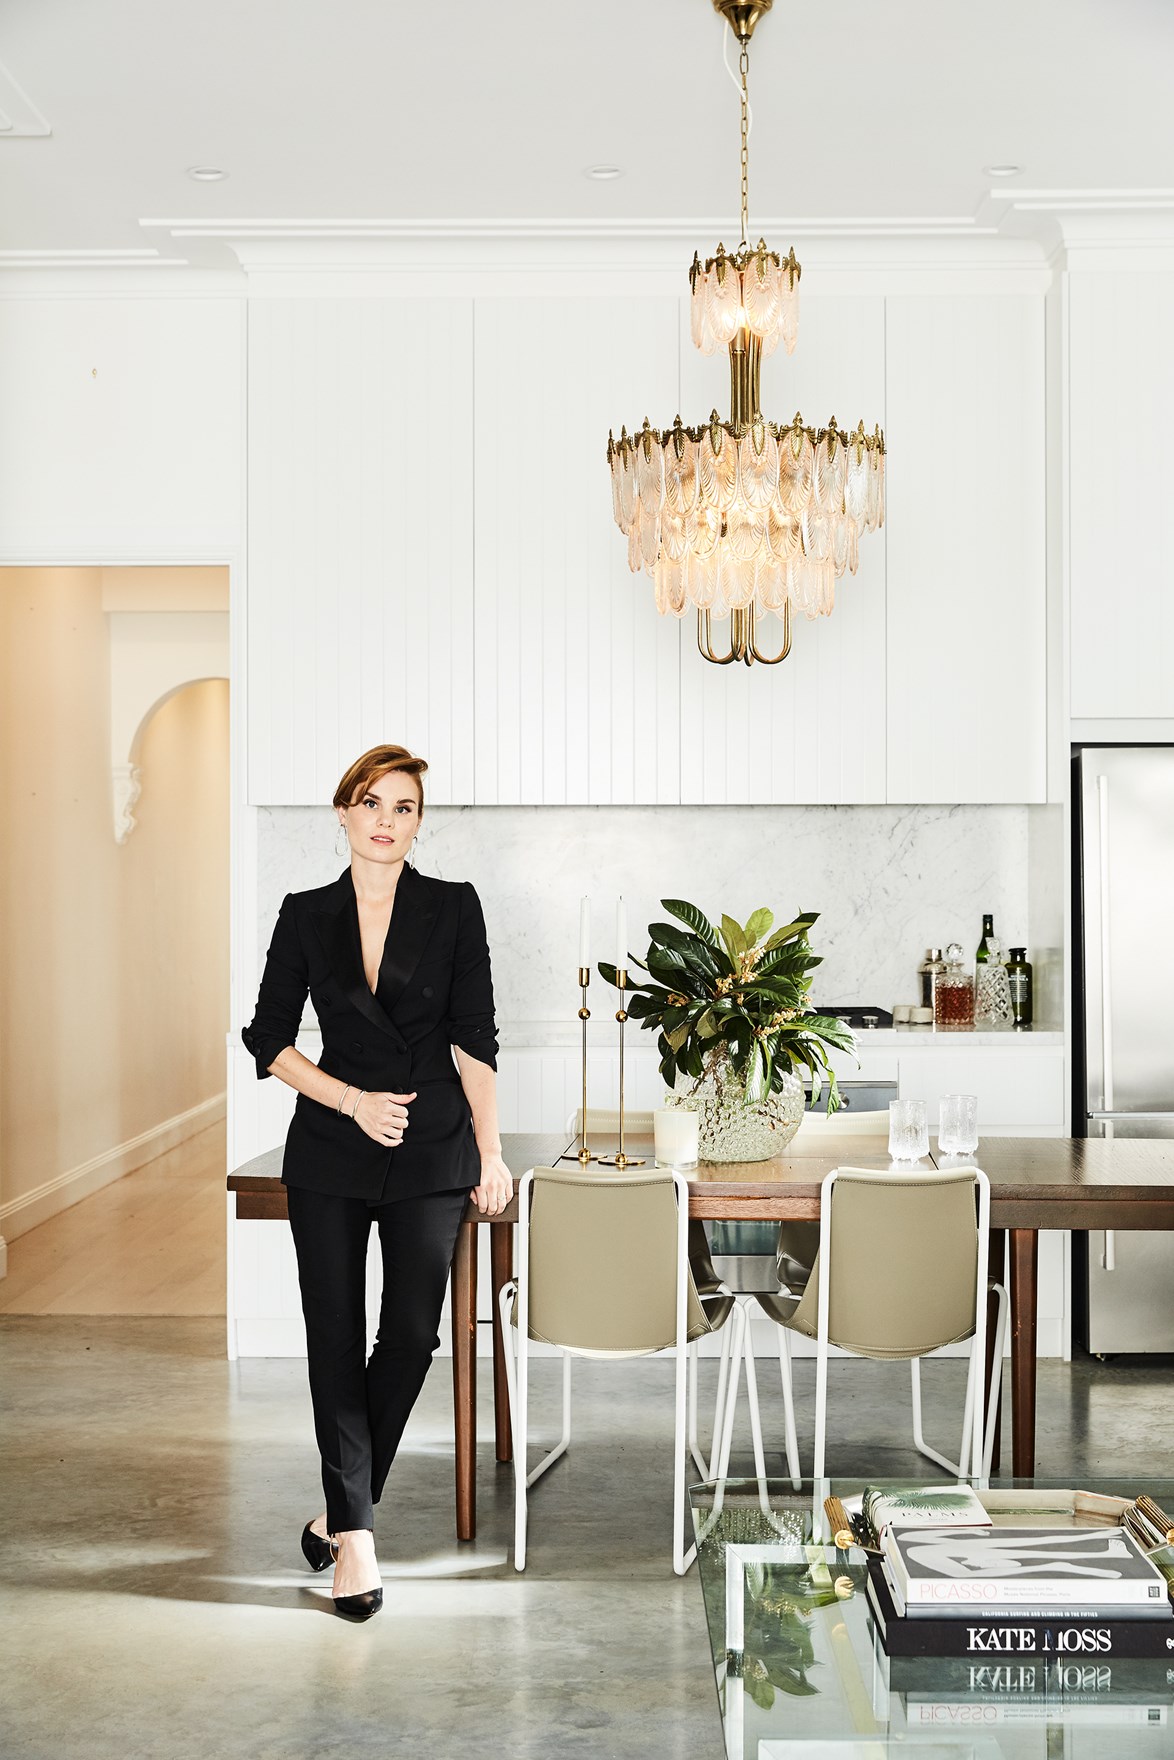 As a fashion stylist, it's only natural that Tanya Levak has an eye for decorating, too. Her [chic inner-city abode](https://www.homestolove.com.au/a-fashionable-cottage-renovation-in-sydney-4053|target="_blank"), reflects her eye for detail and luxurious finishes. A Japanese Art Deco chandelier from The Bronte Tram in Sydney acts like a statement pair of earrings and creates a focal point of the dining area. *Photo:* Sylvè Colless